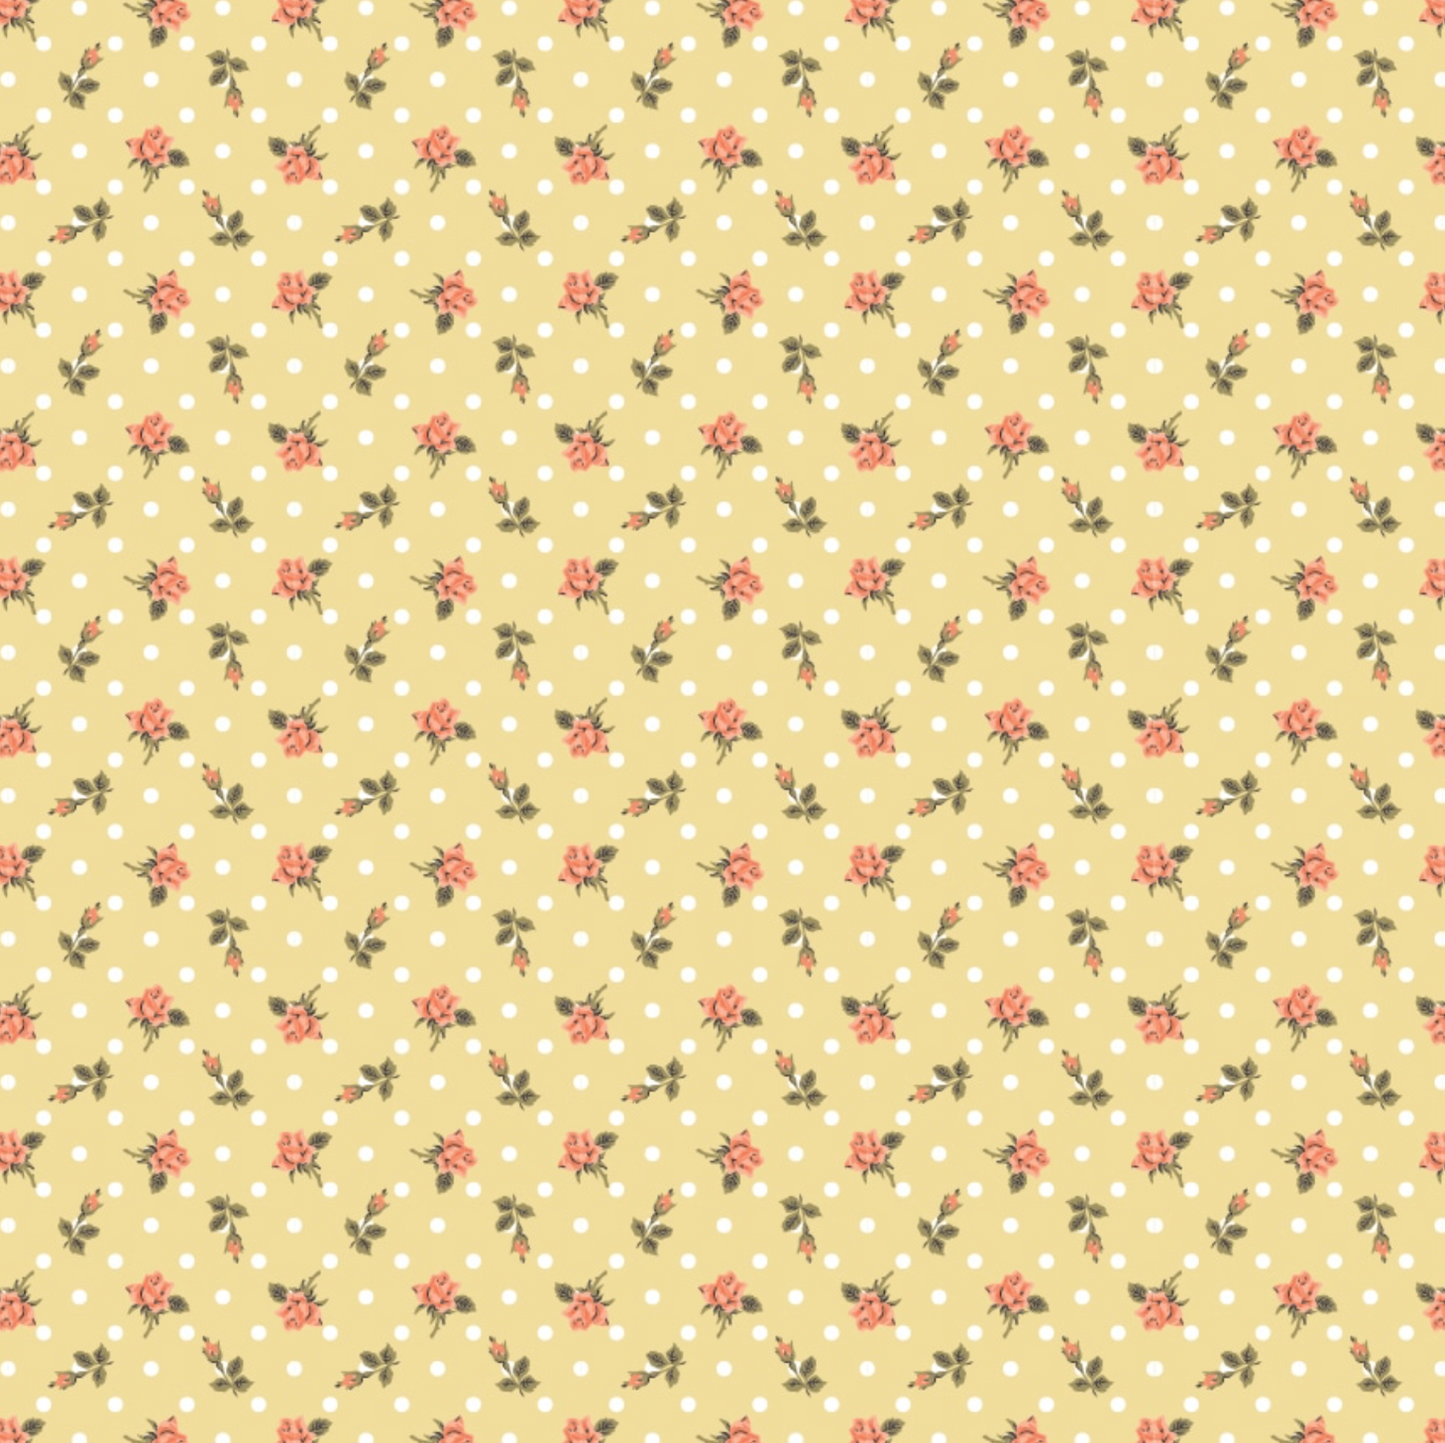 Delightful Department Store Lucy Yellow DS23216, sold by the 1/2 yard